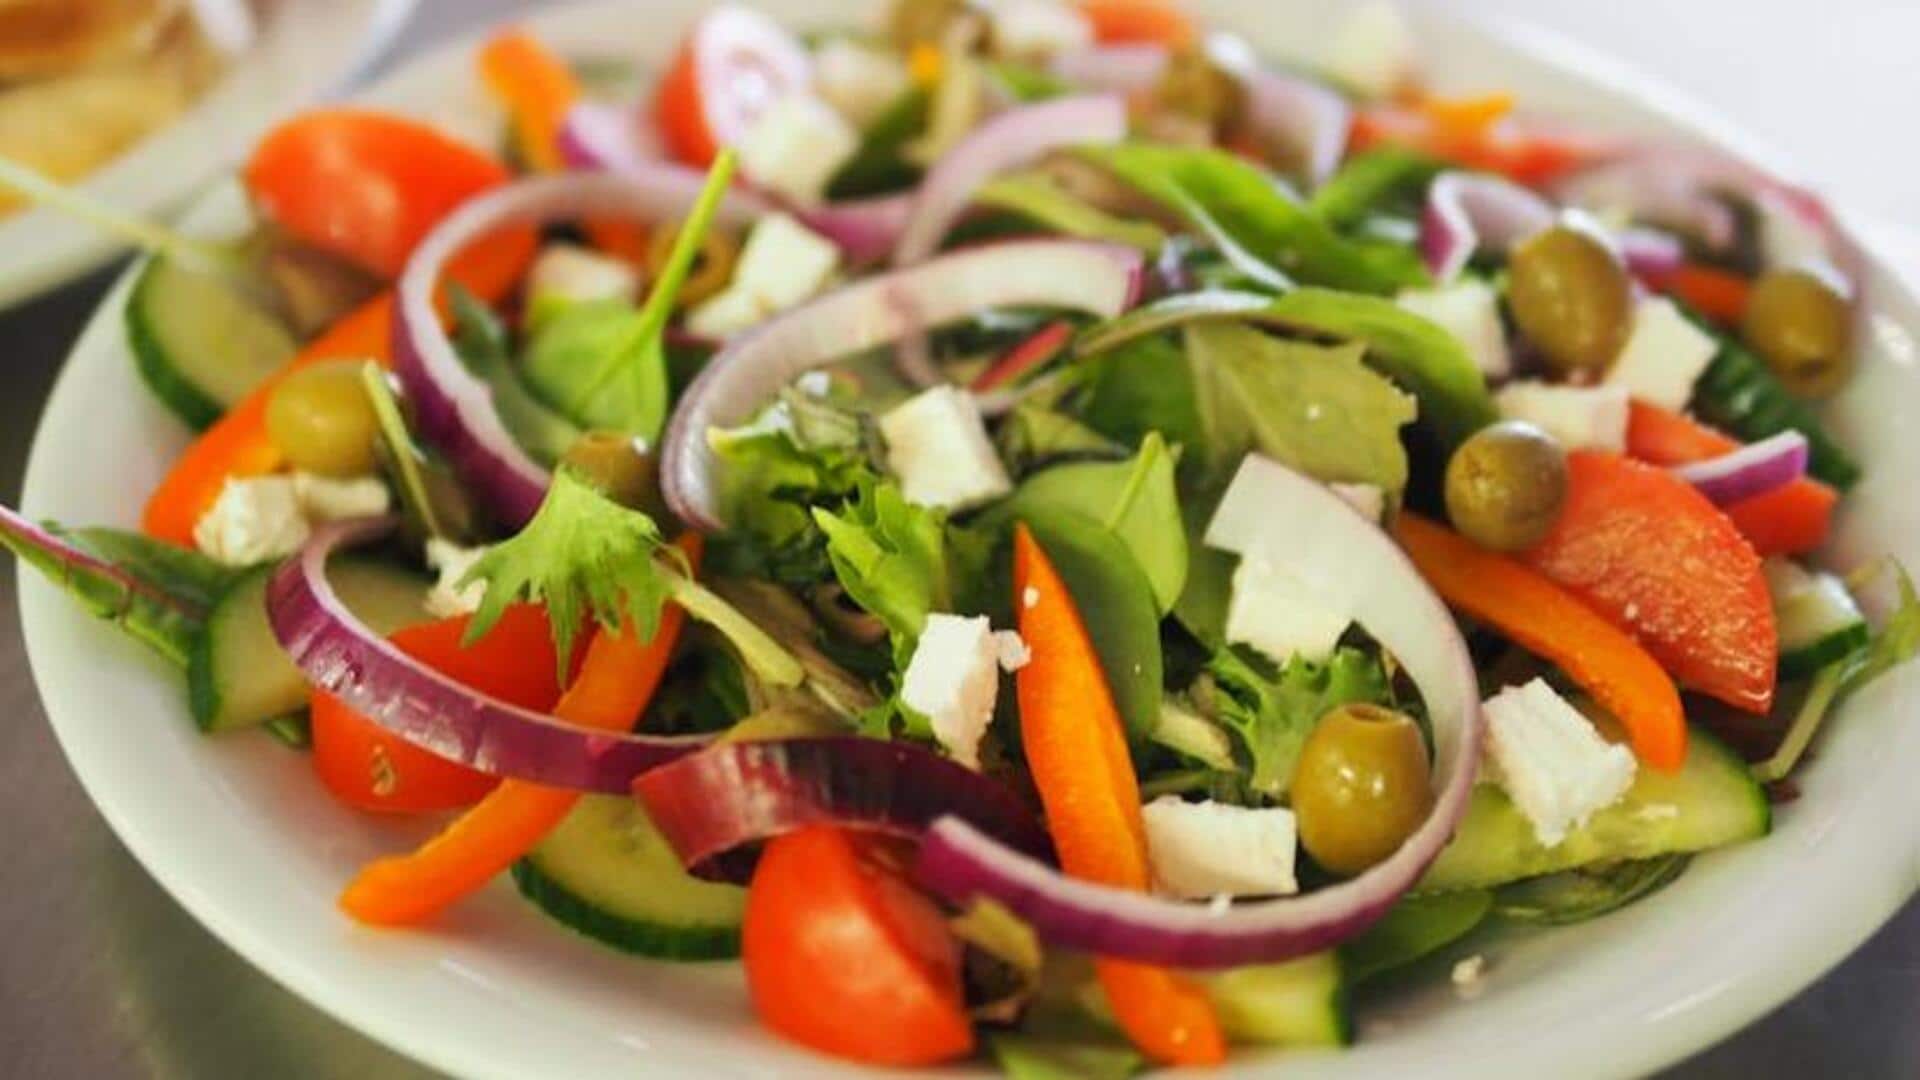 Boost your health with omega-3 vegan salads